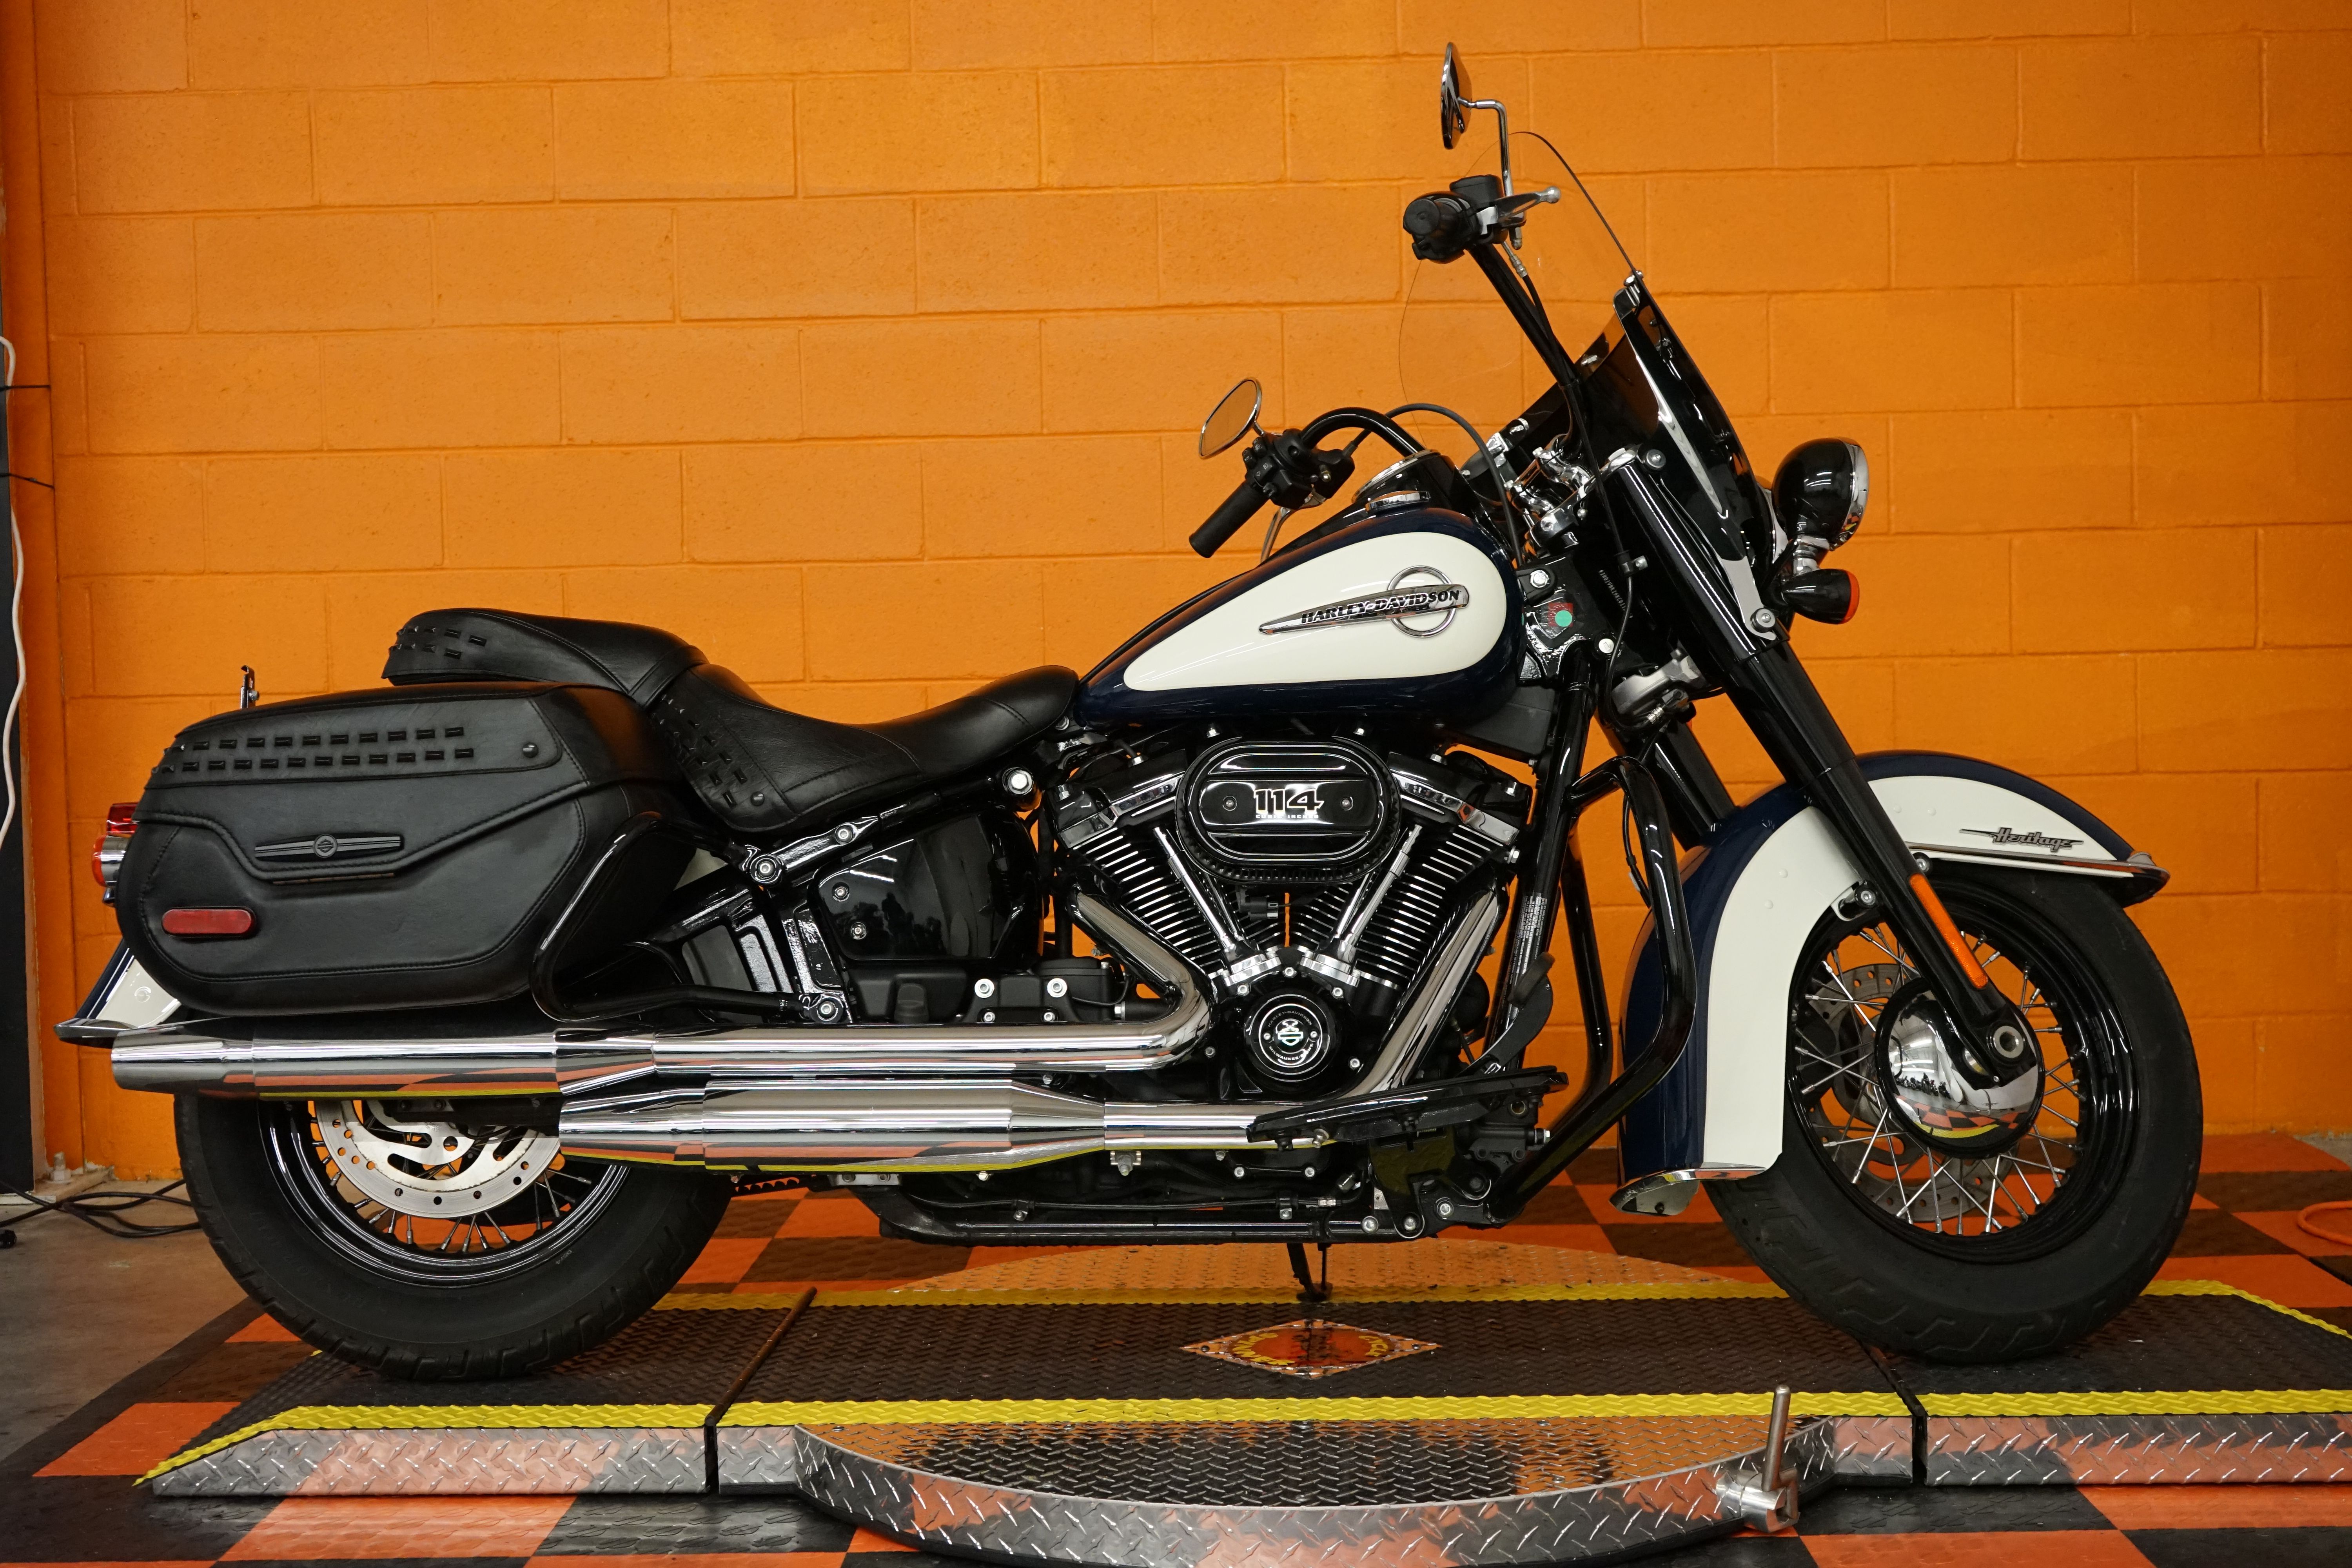 PreOwned 2019 HarleyDavidson Softail Heritage Classic 114 FLHCS